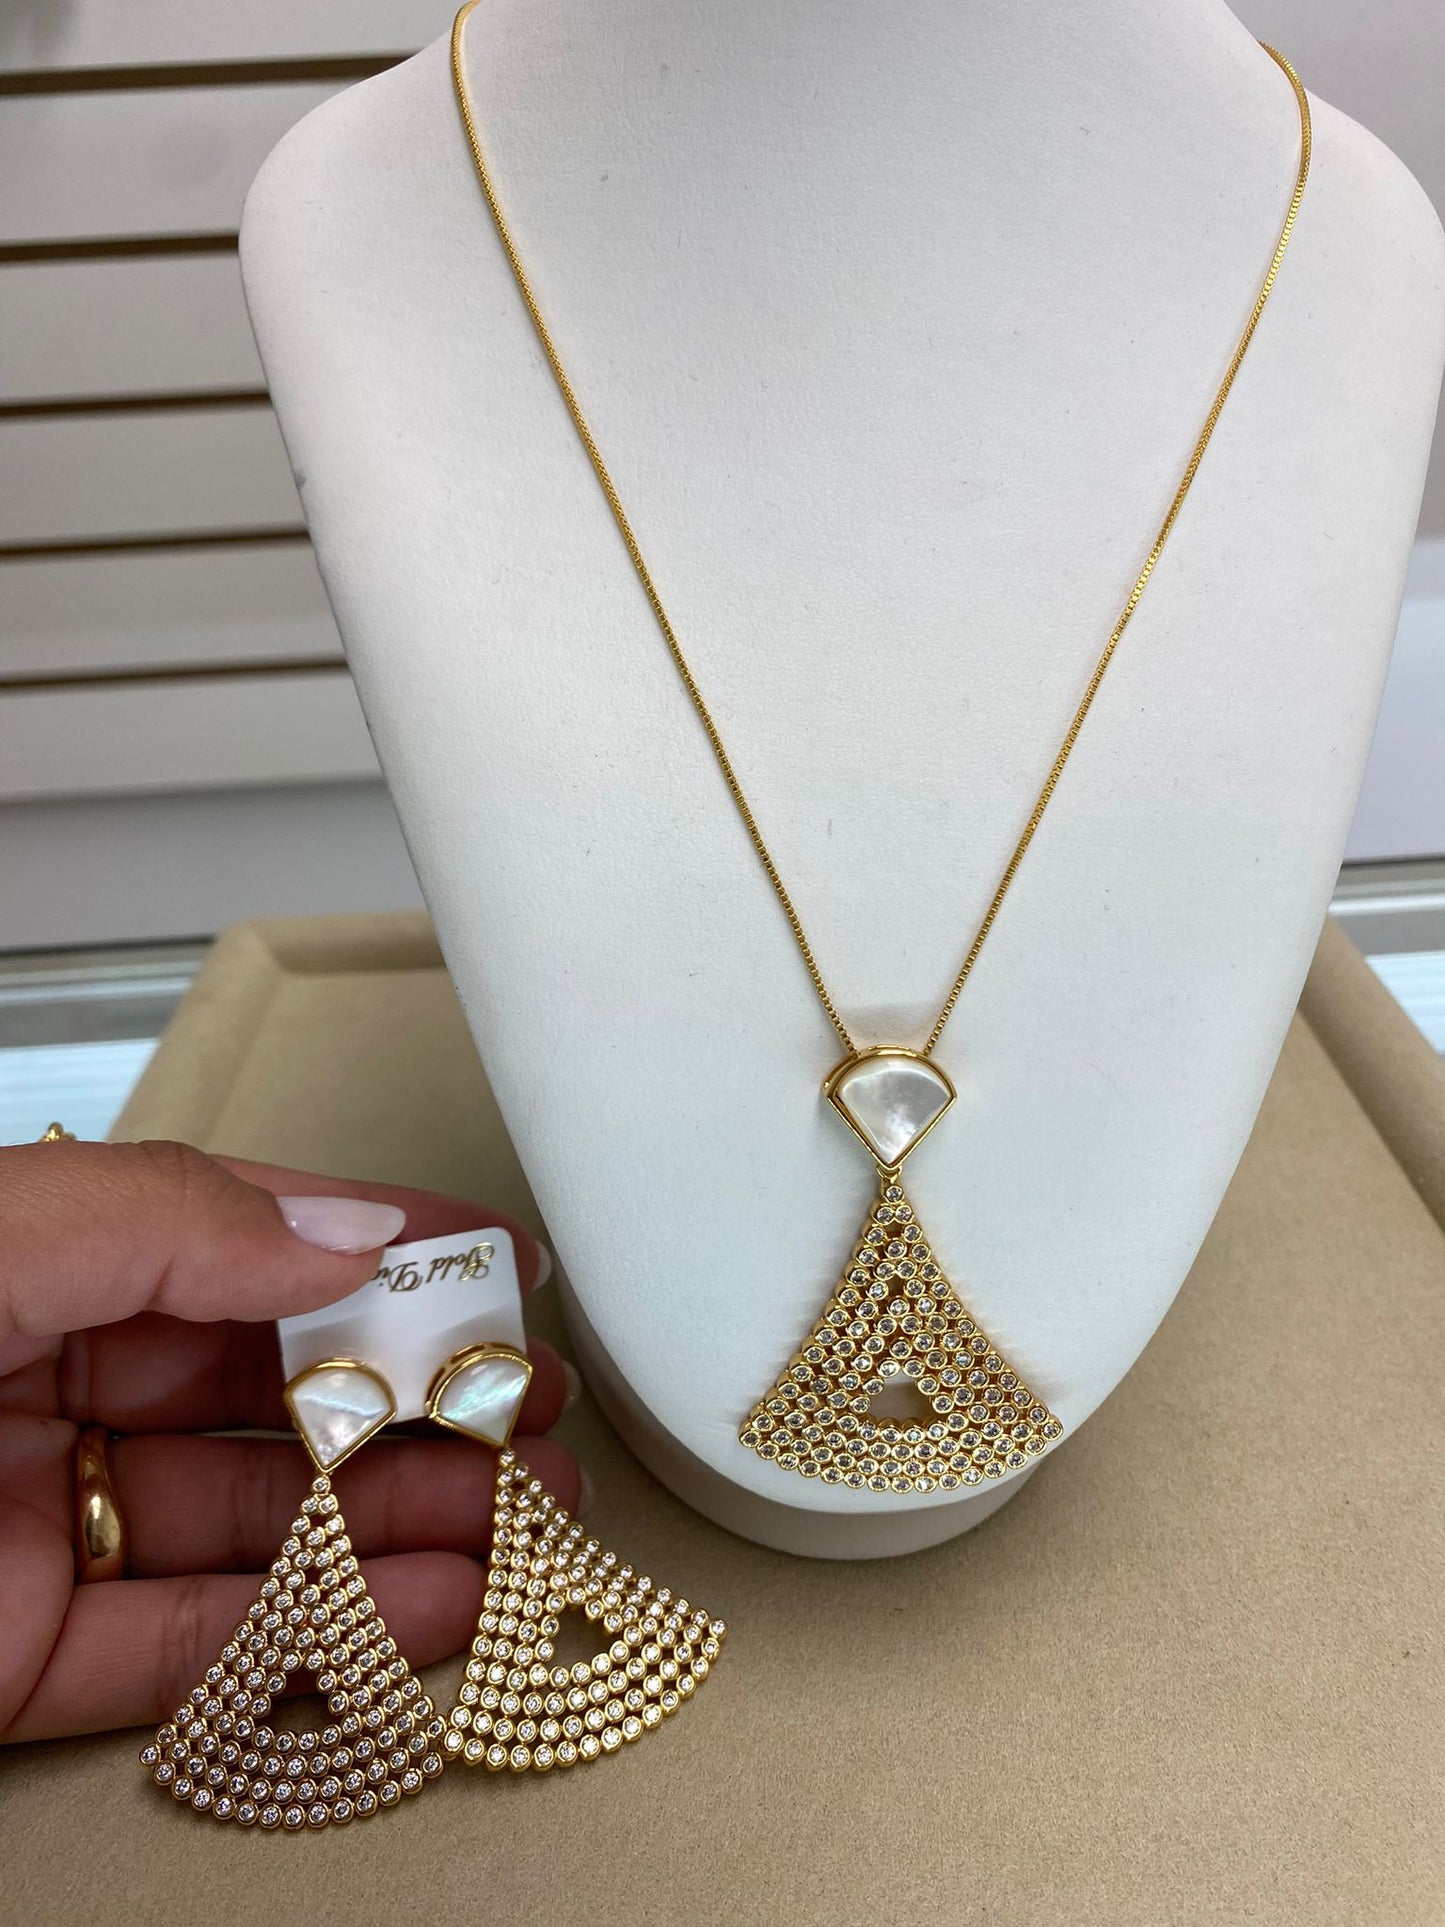 Golden Triangle Pendant Necklace with Zirconia and White Stone